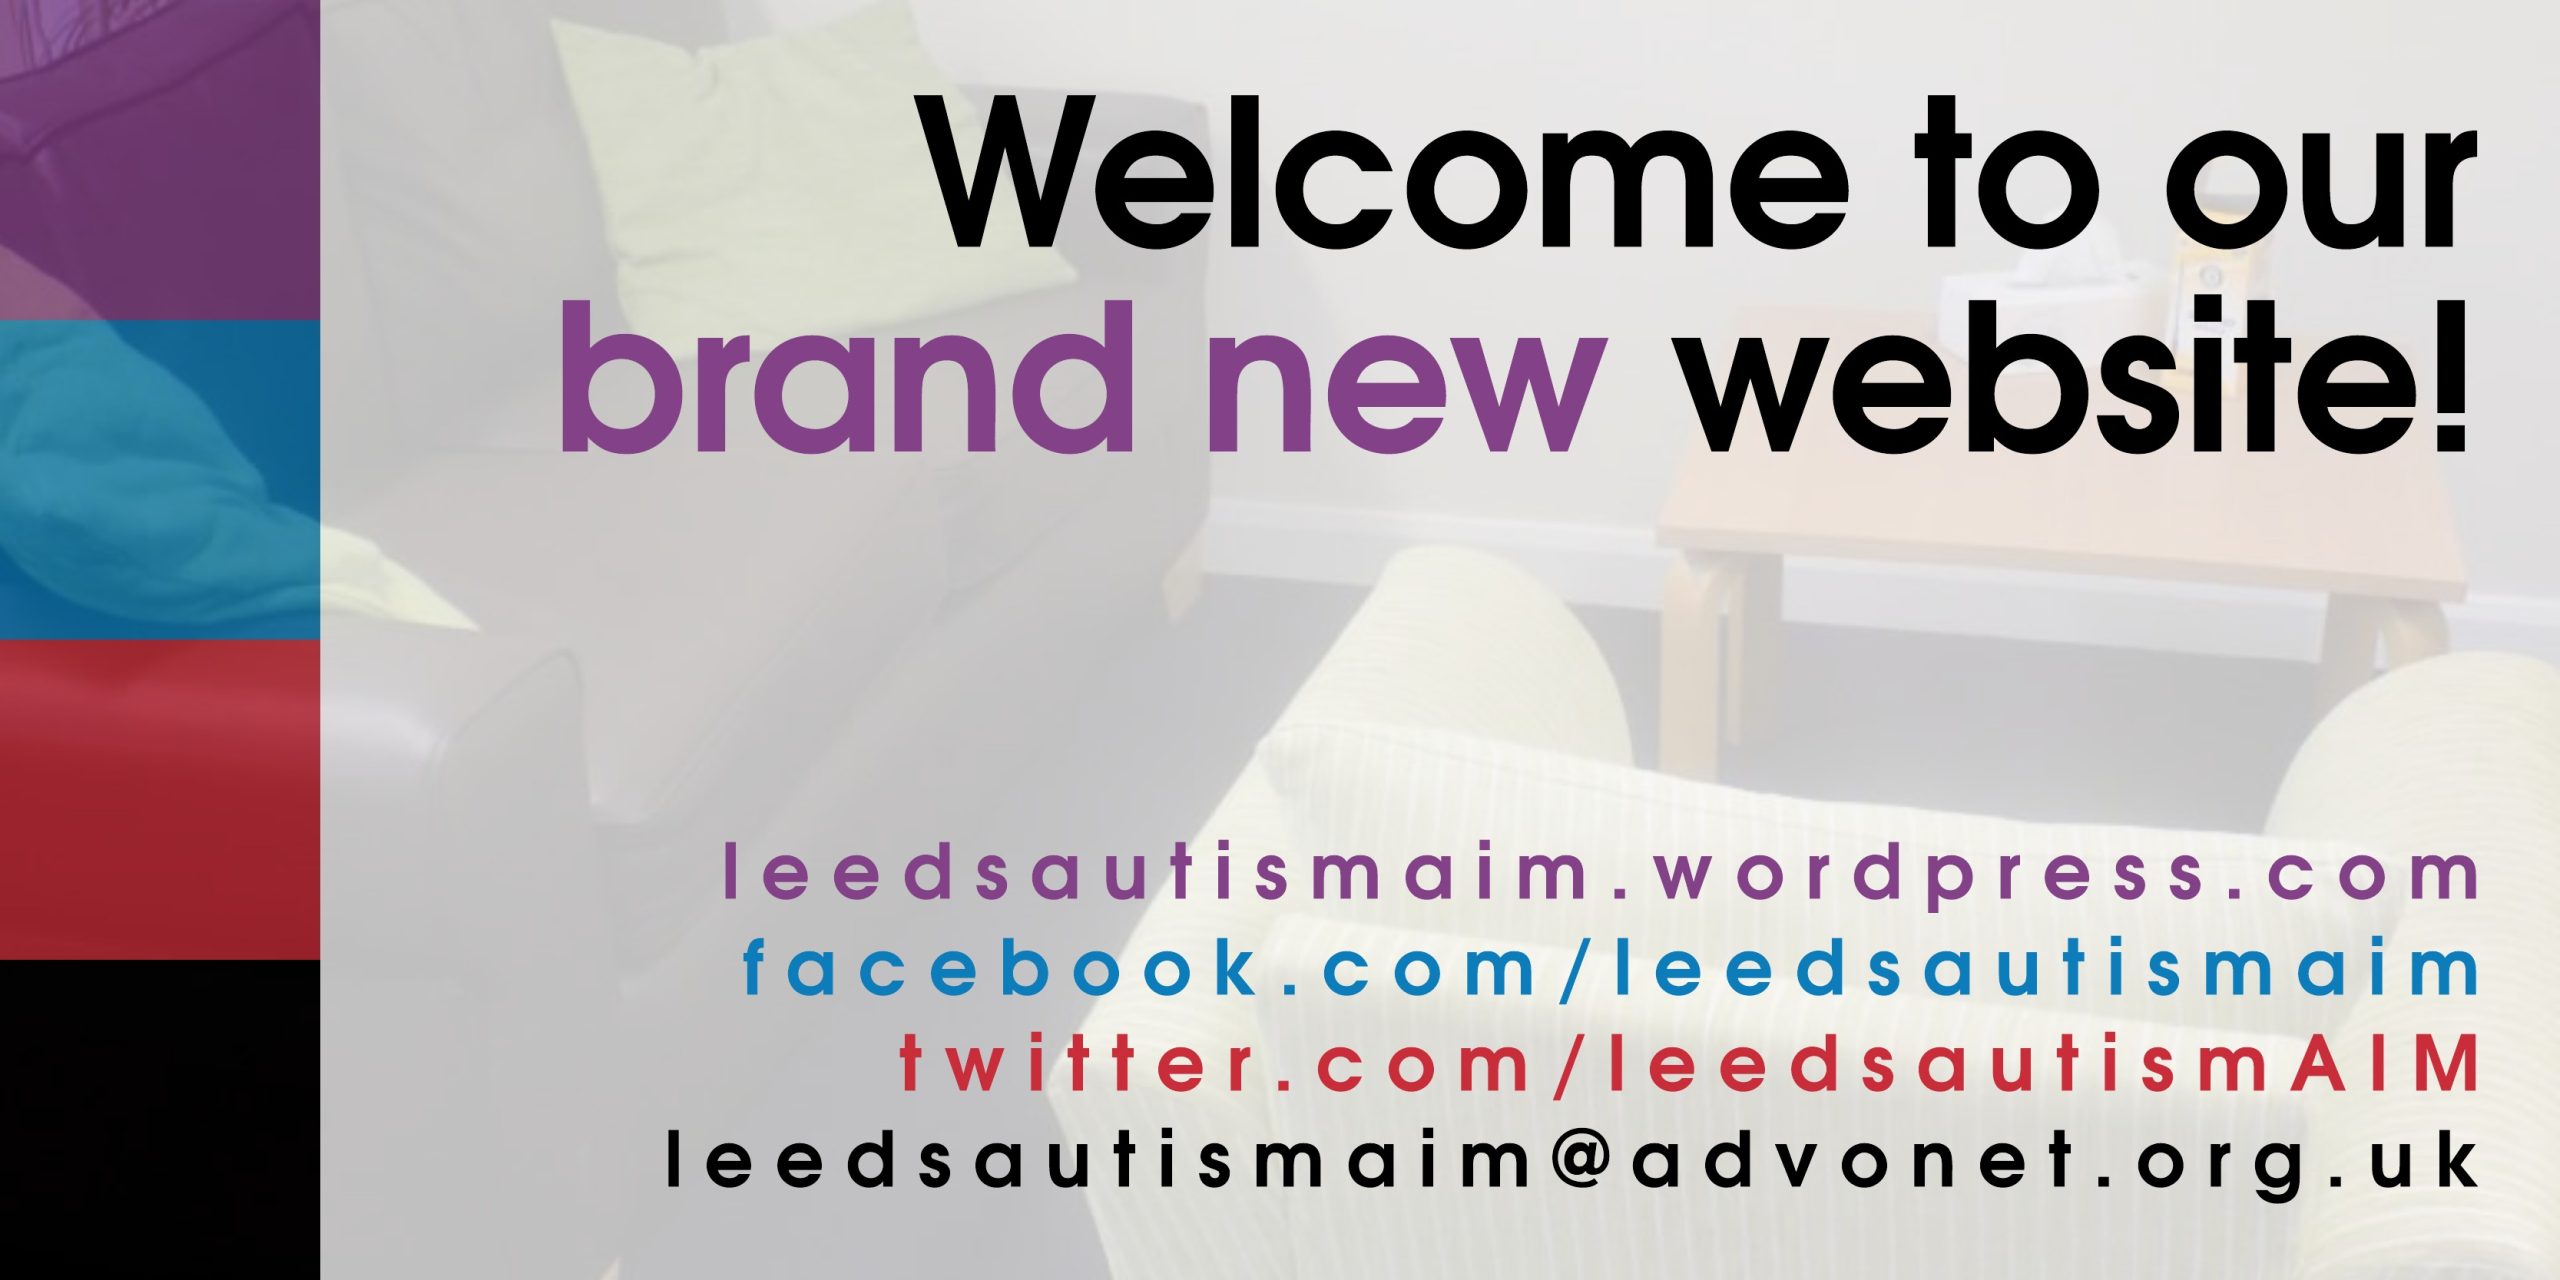 Welcome to our brand new website!